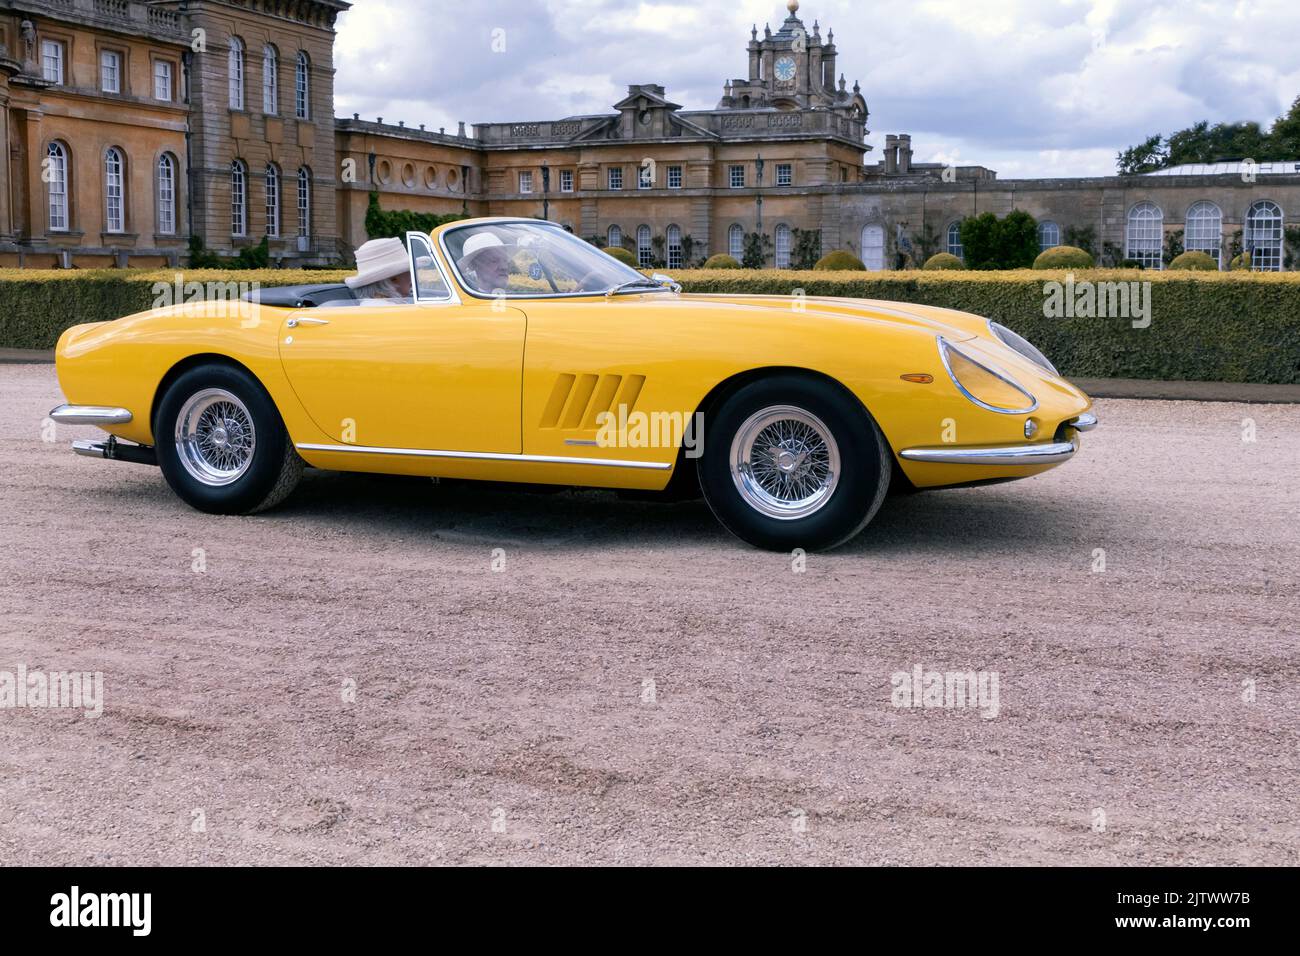 1967 Ferrari 275 GTS/4 N.A.R.T. Spider at Salon Prive Concours at Blenheim Palace Oxfordshire UK Stock Photo